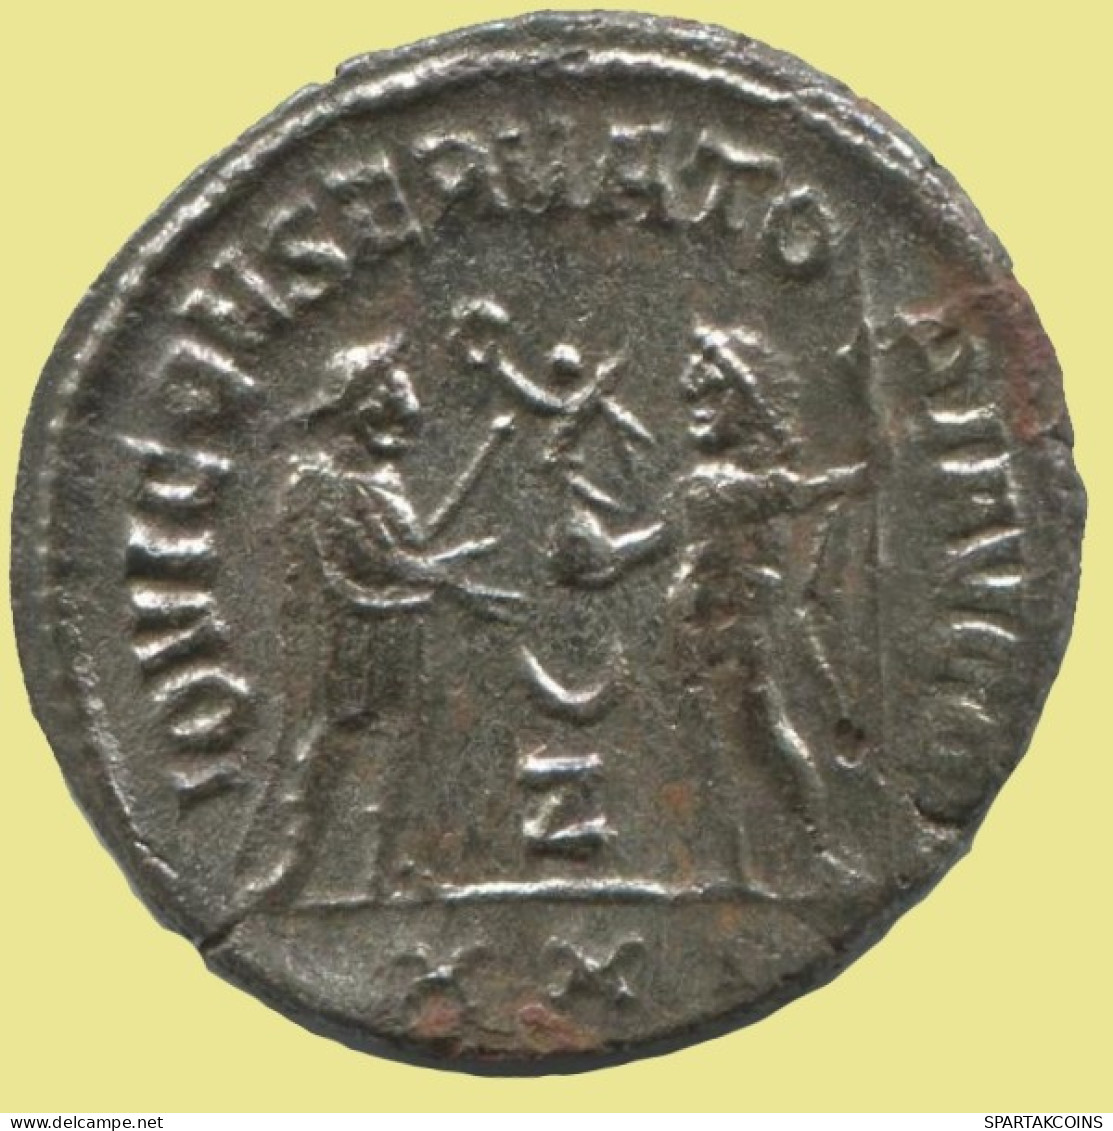 DIOCLETIAN ANTONINIANUS Antioch (? Z/XXI) AD293 IOVETHERCVCONSER. #ANT1871.48.E.A - The Tetrarchy (284 AD To 307 AD)